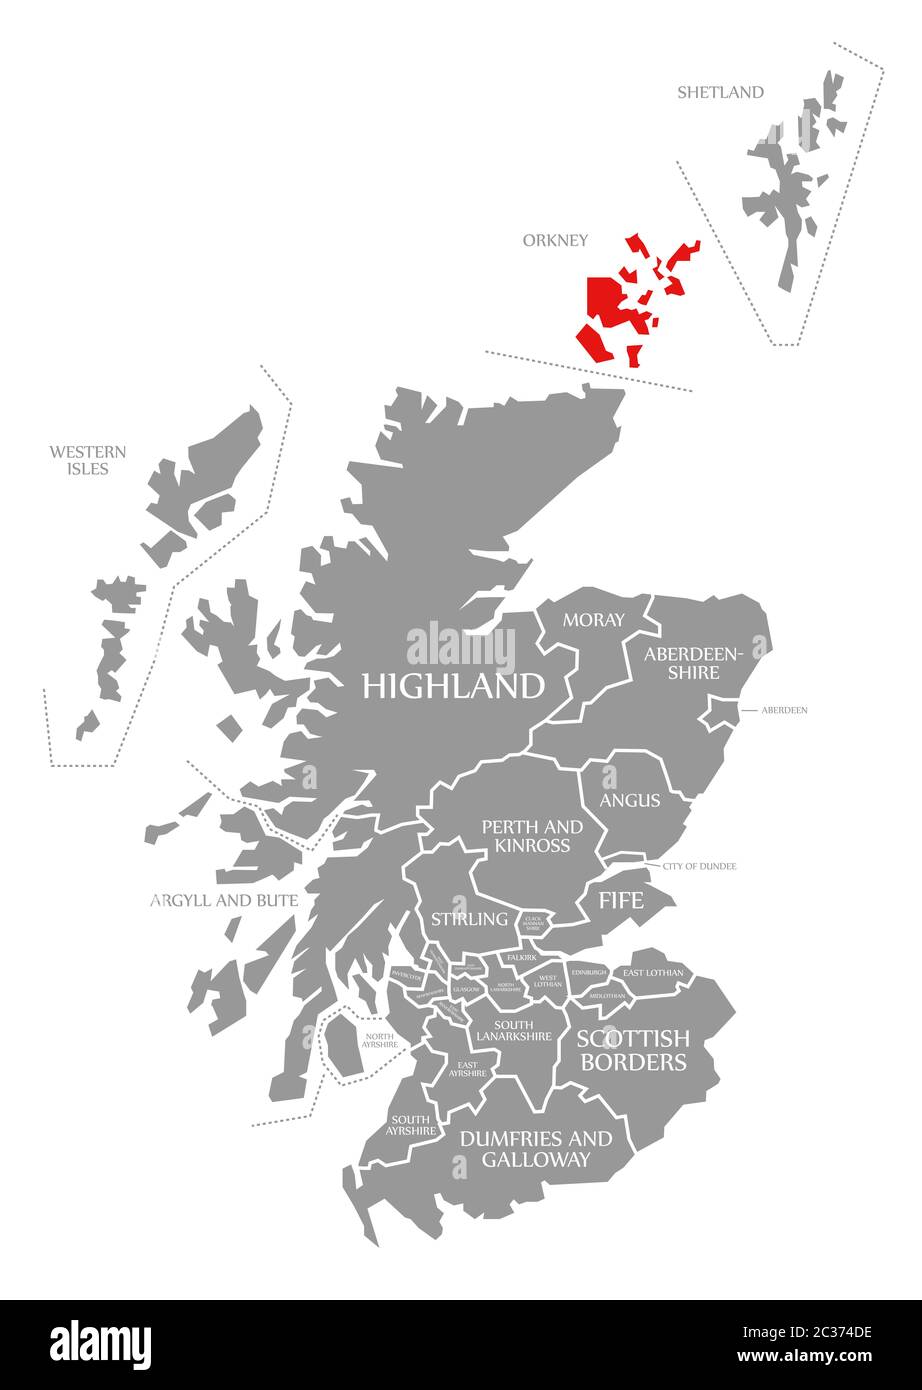 Orkney red highlighted in map of Scotland UK Stock Photo